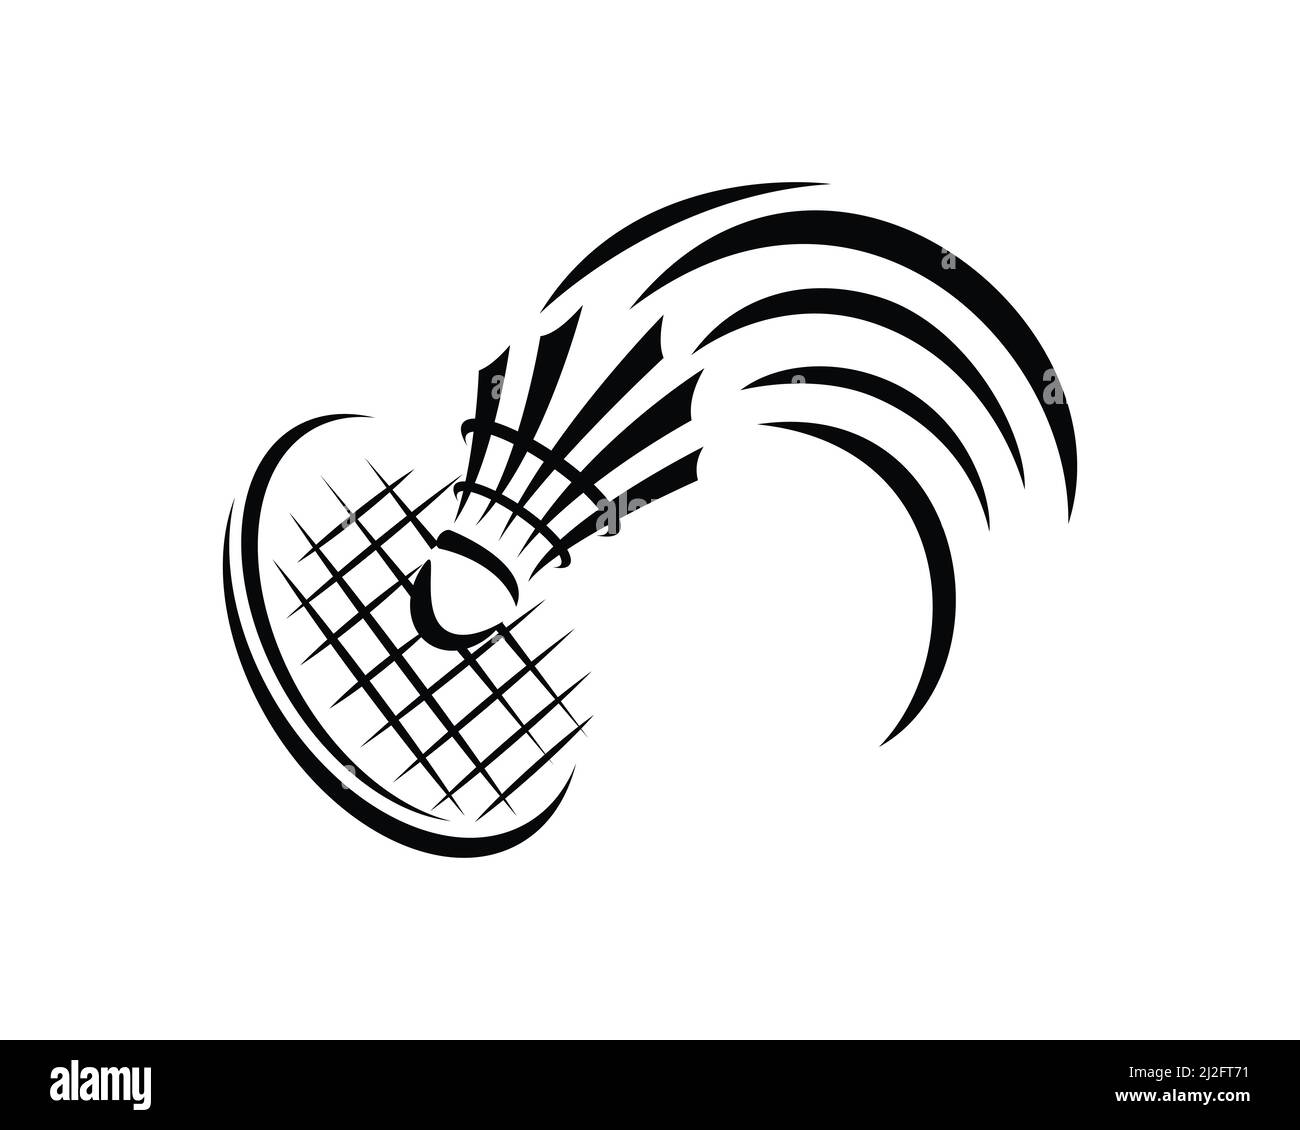 Badminton Game with Racket and Shuttlecock Silhouette Vector Stock Vector